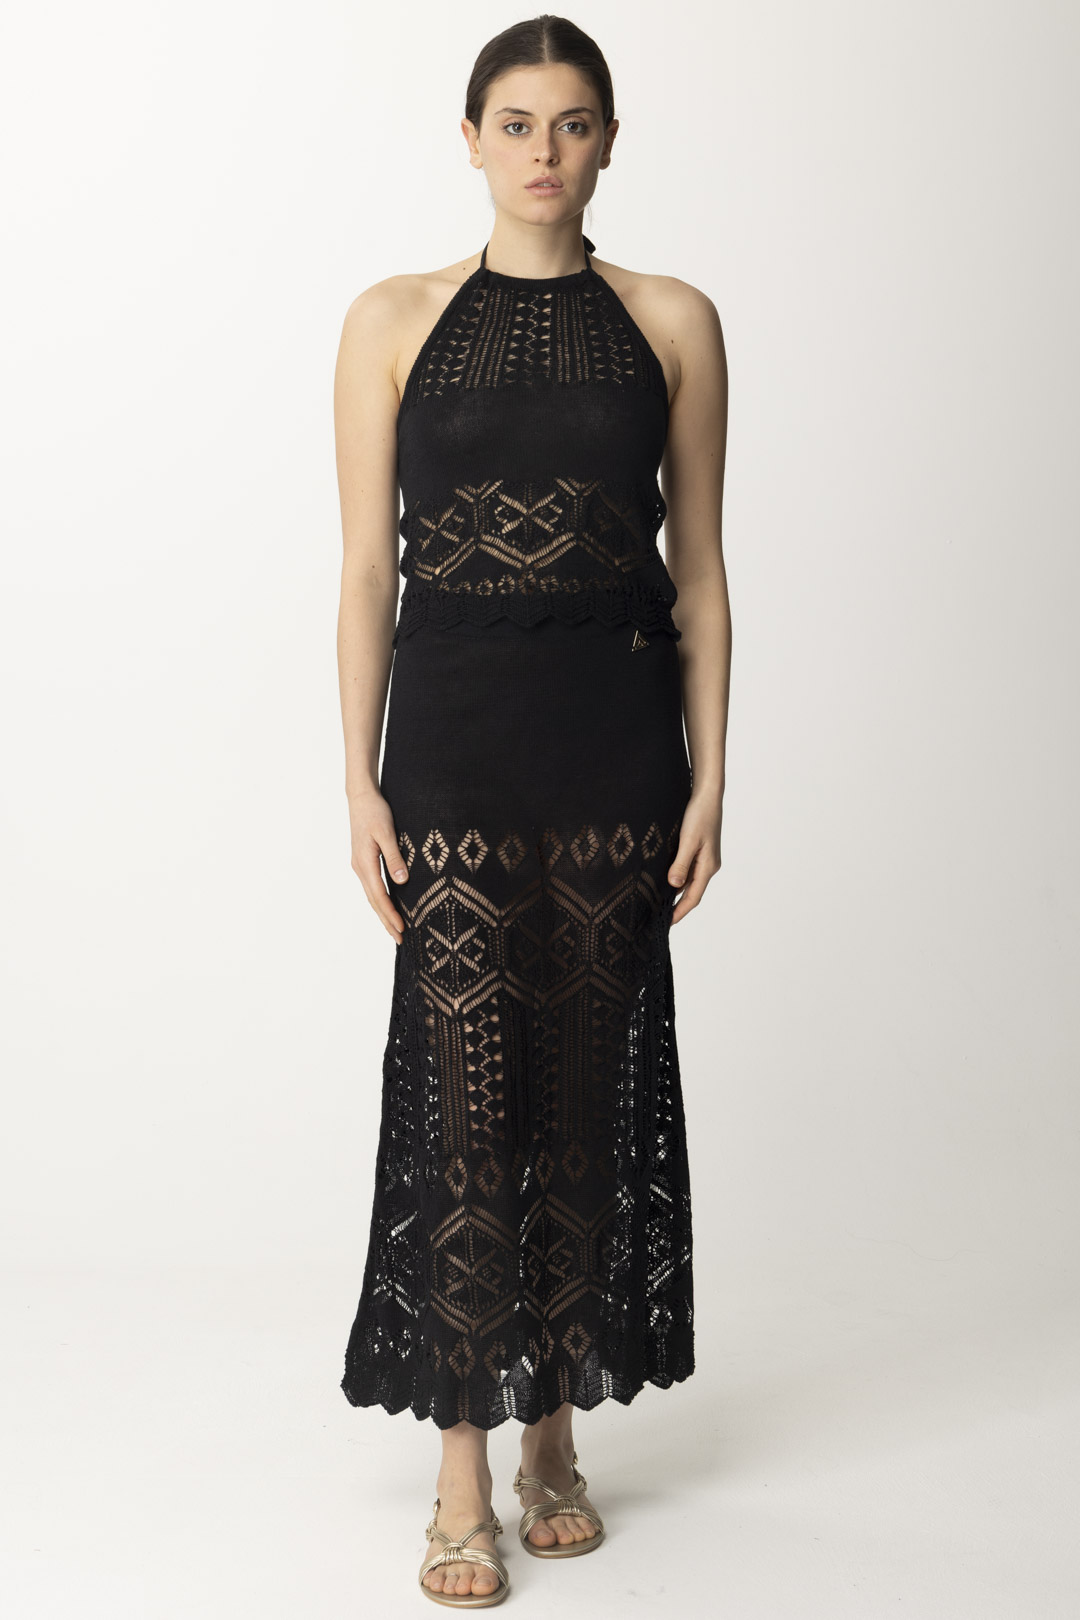 Preview: AKEP Perforated top with halter neckline Nero